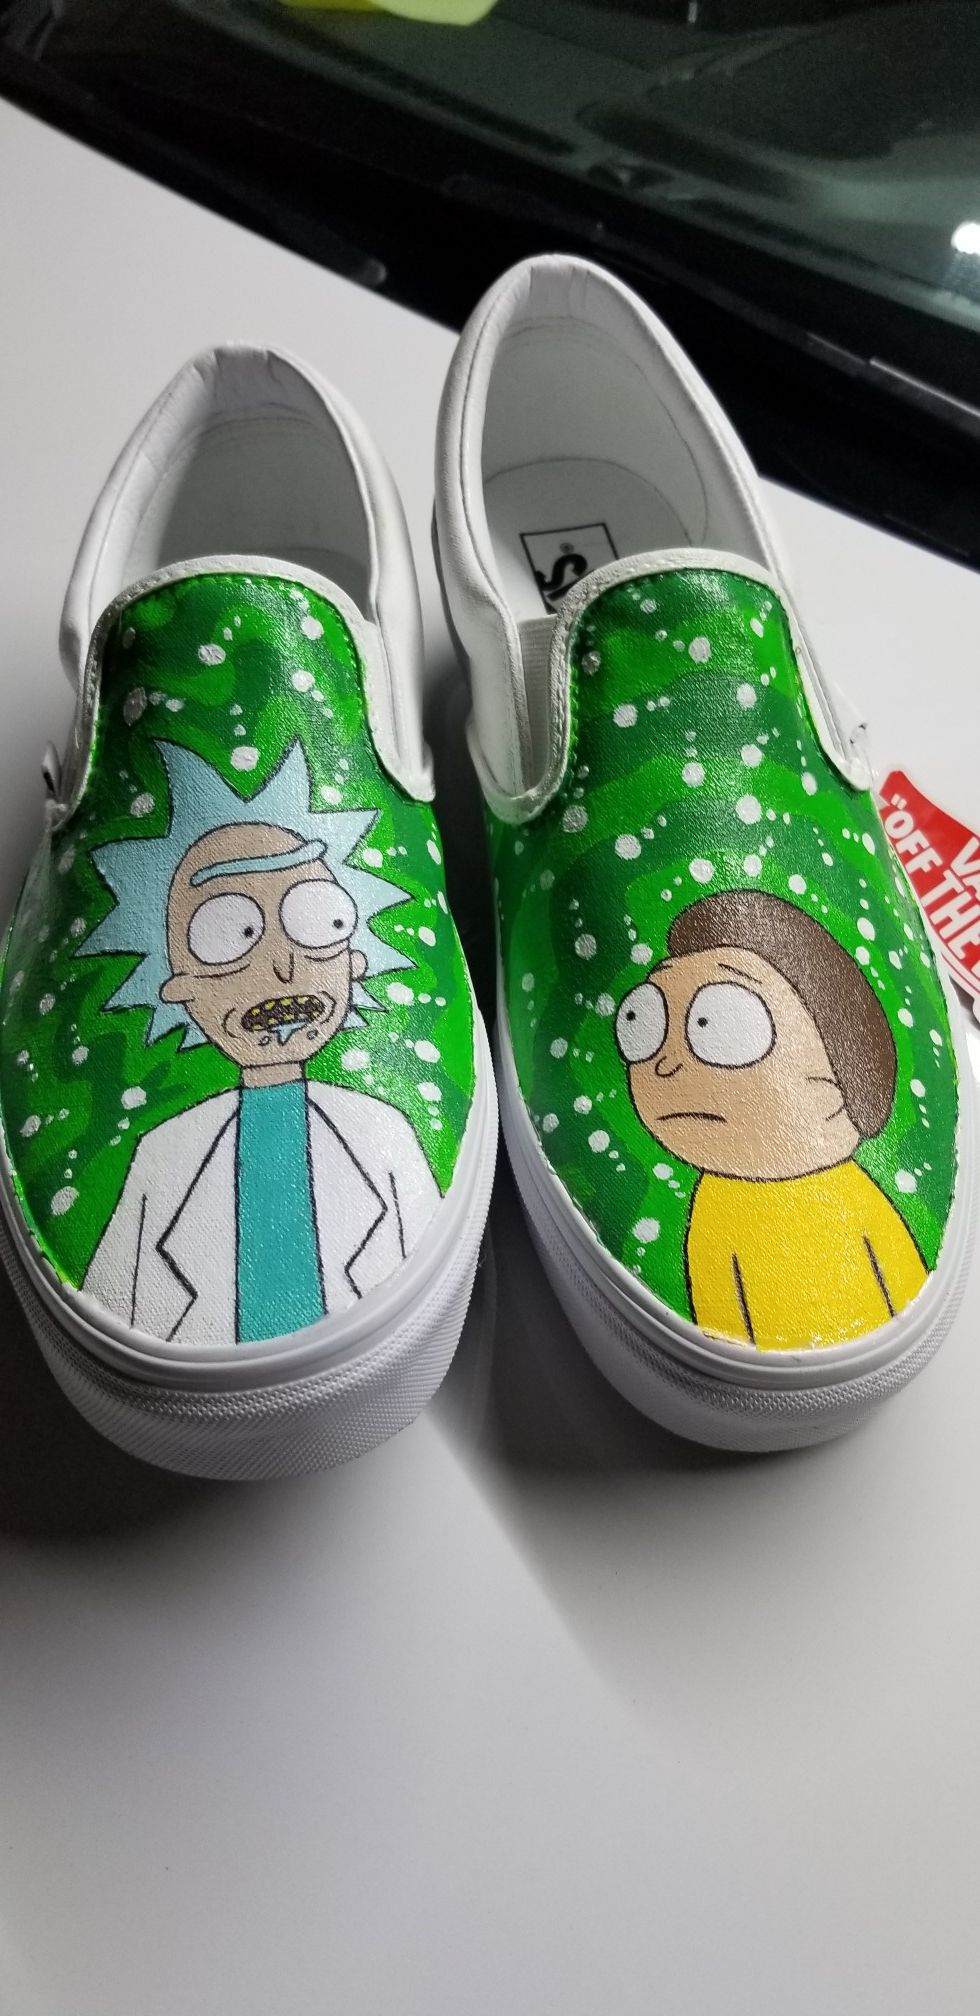 Rick and Morty Customized Vans! Size 10.5